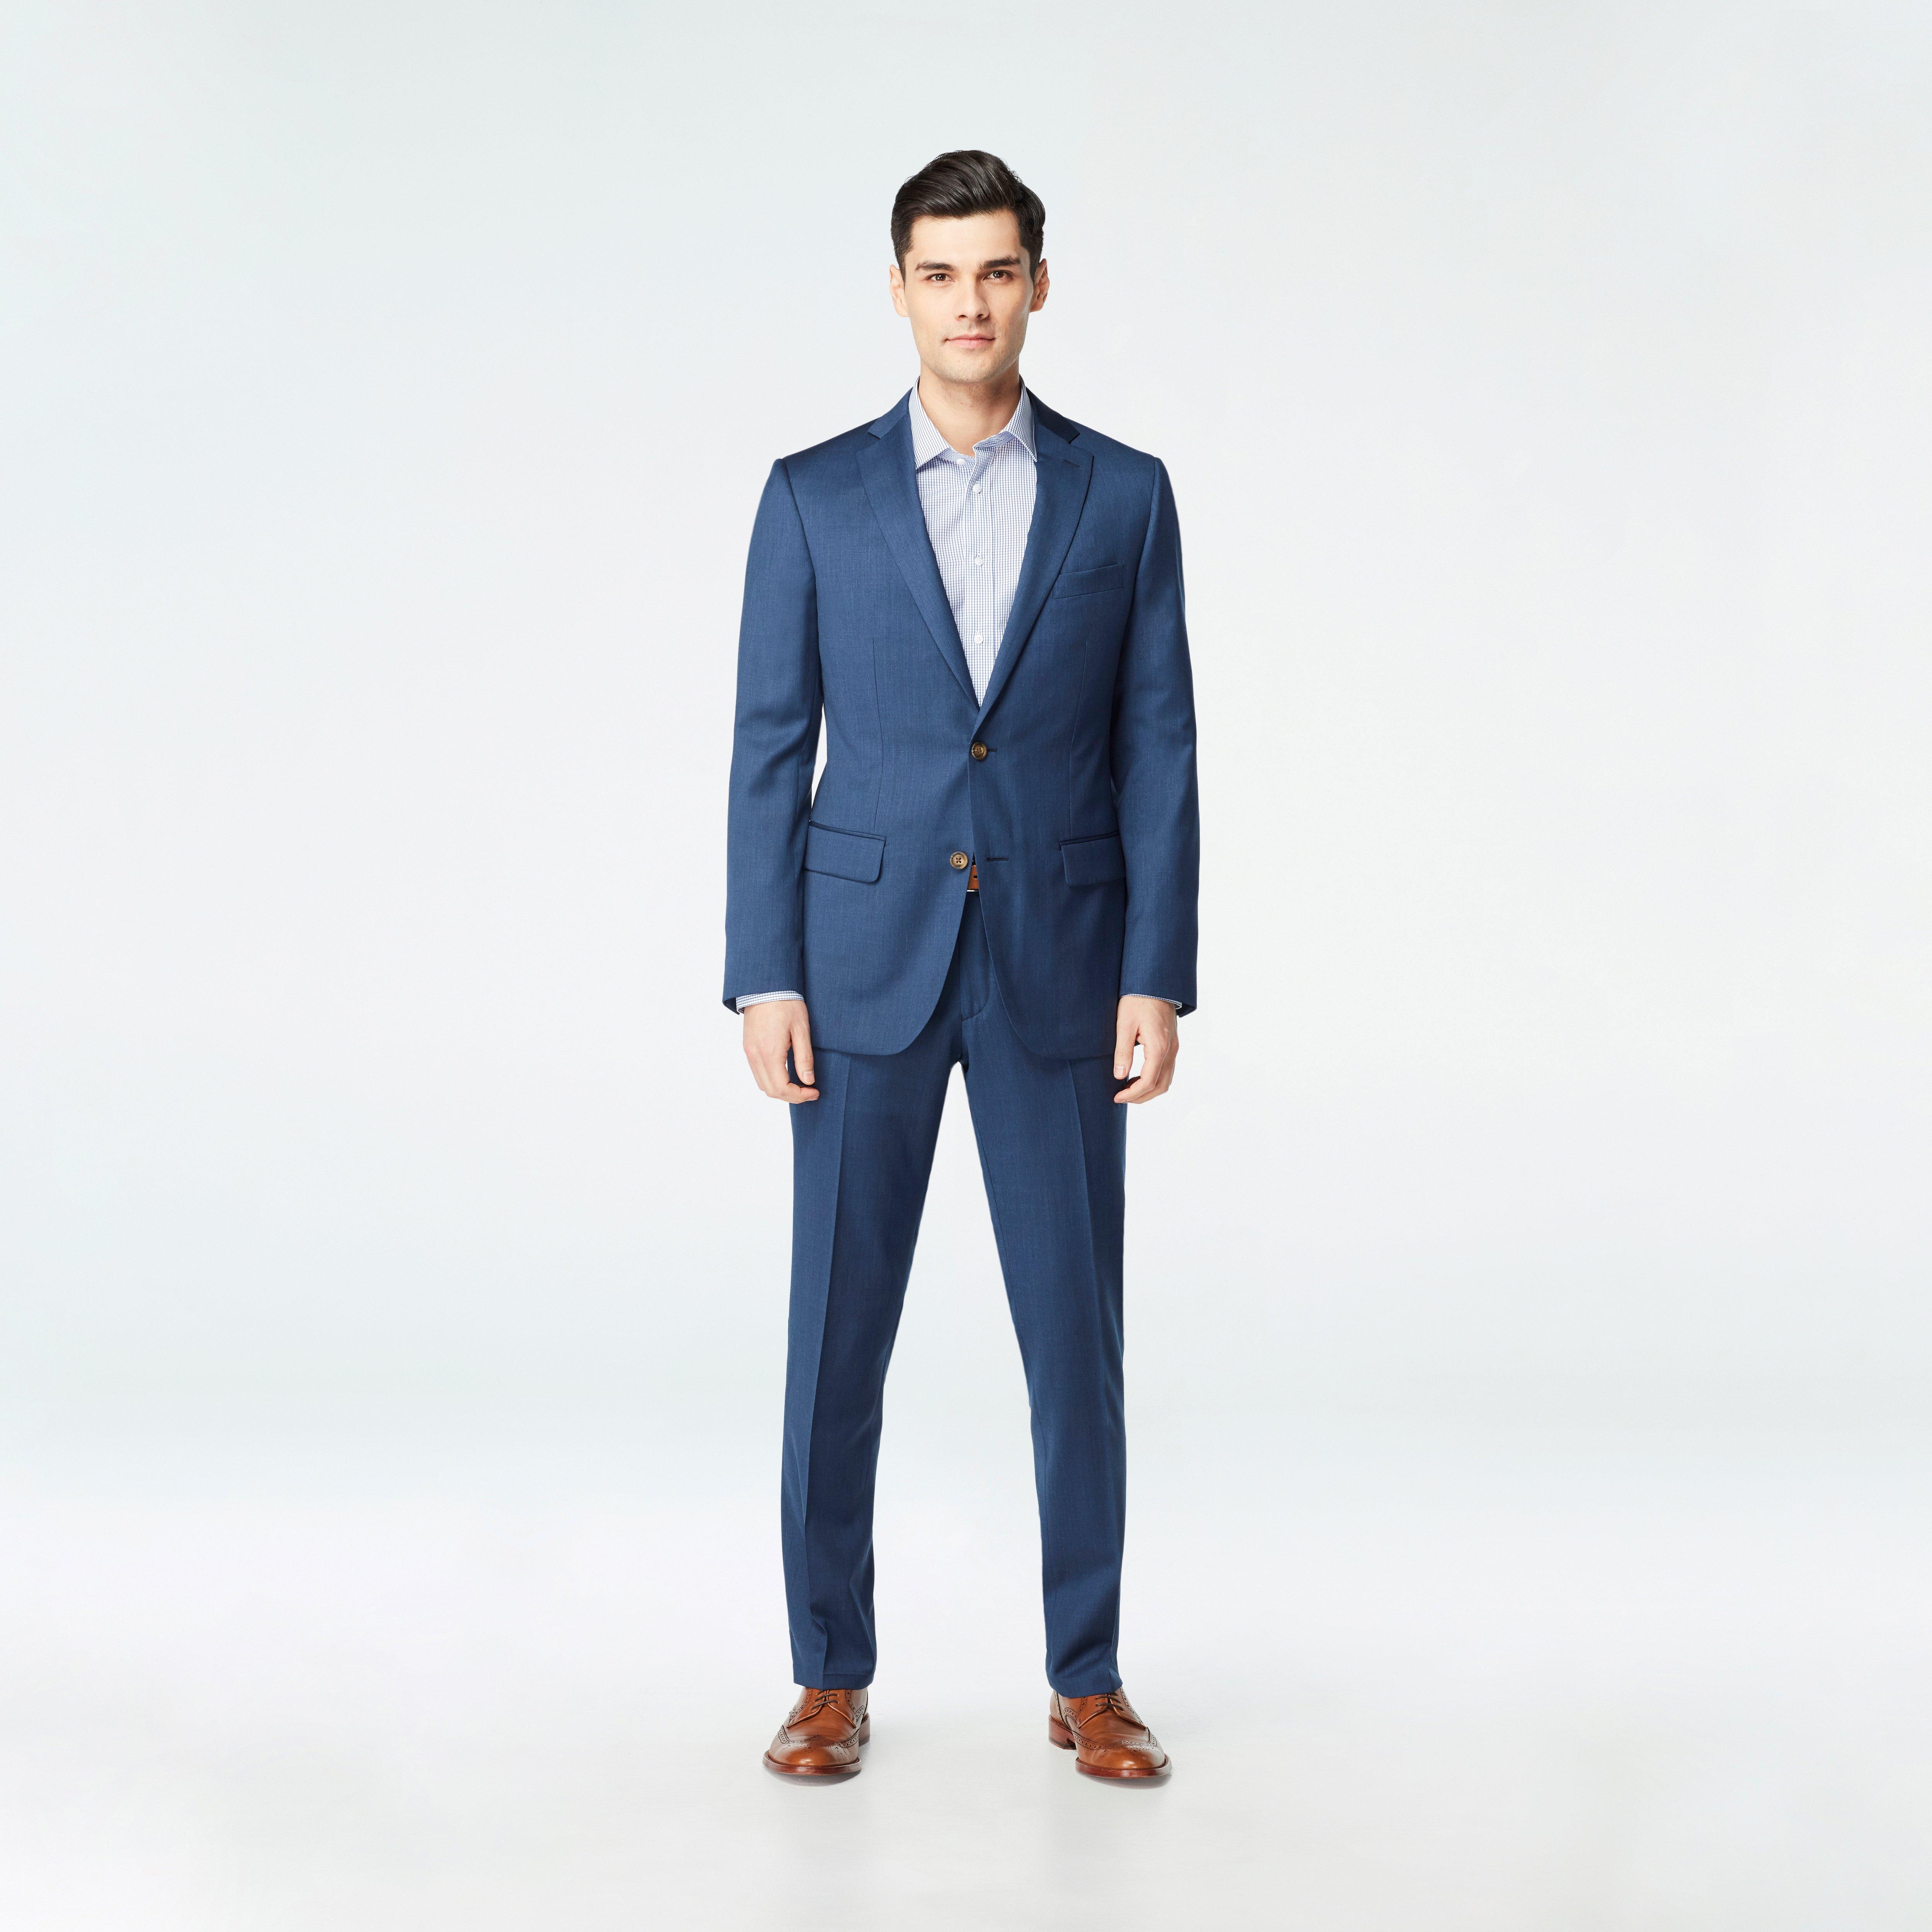 Men's Blue and Navy Suits, Explore our New Arrivals